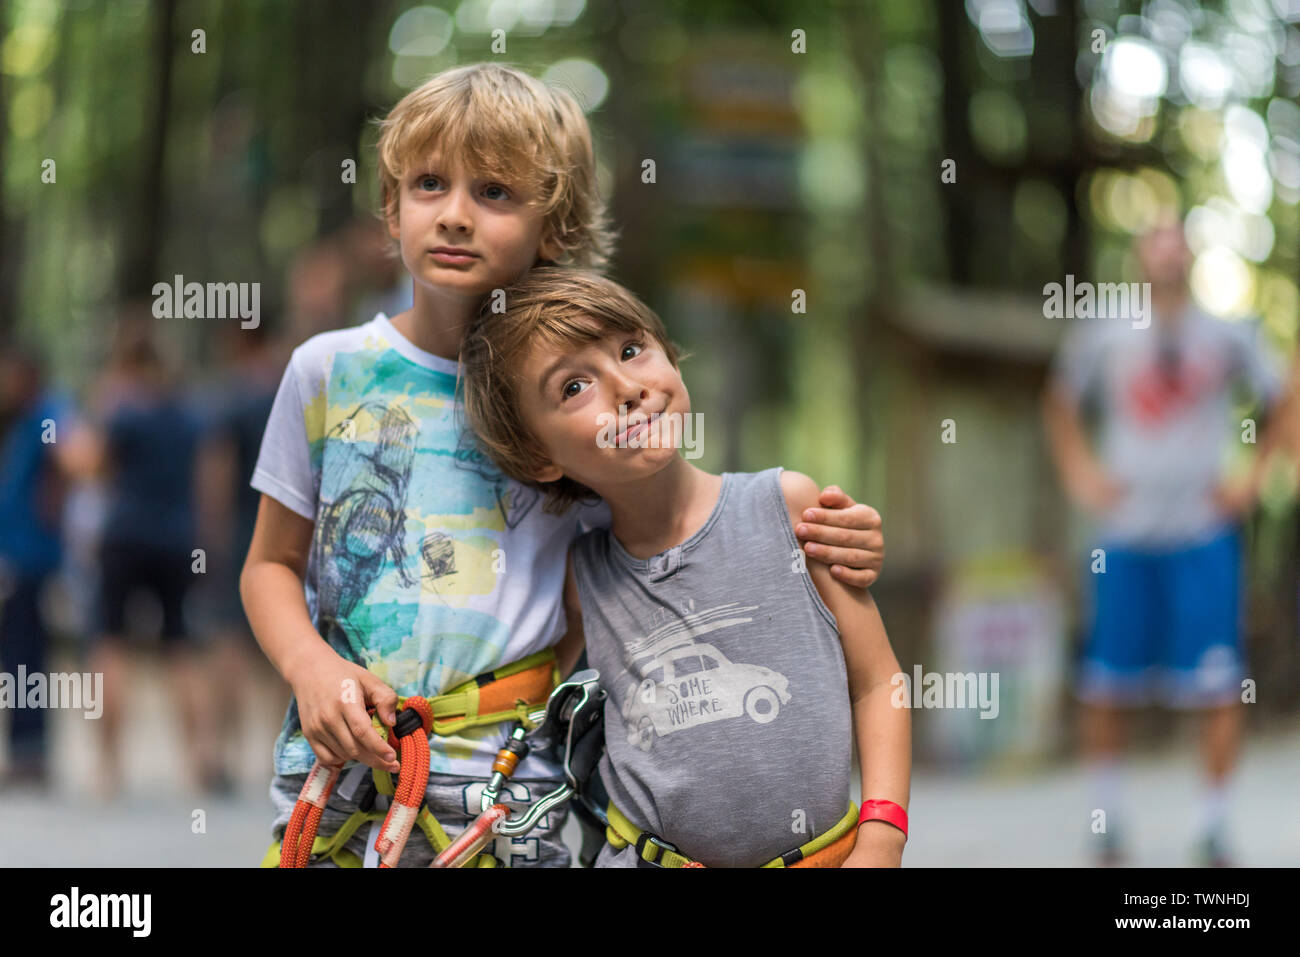 The two friends spend quality time together at a playground, having fun, being the subjects of a photo session as models for all children, to show how Stock Photo